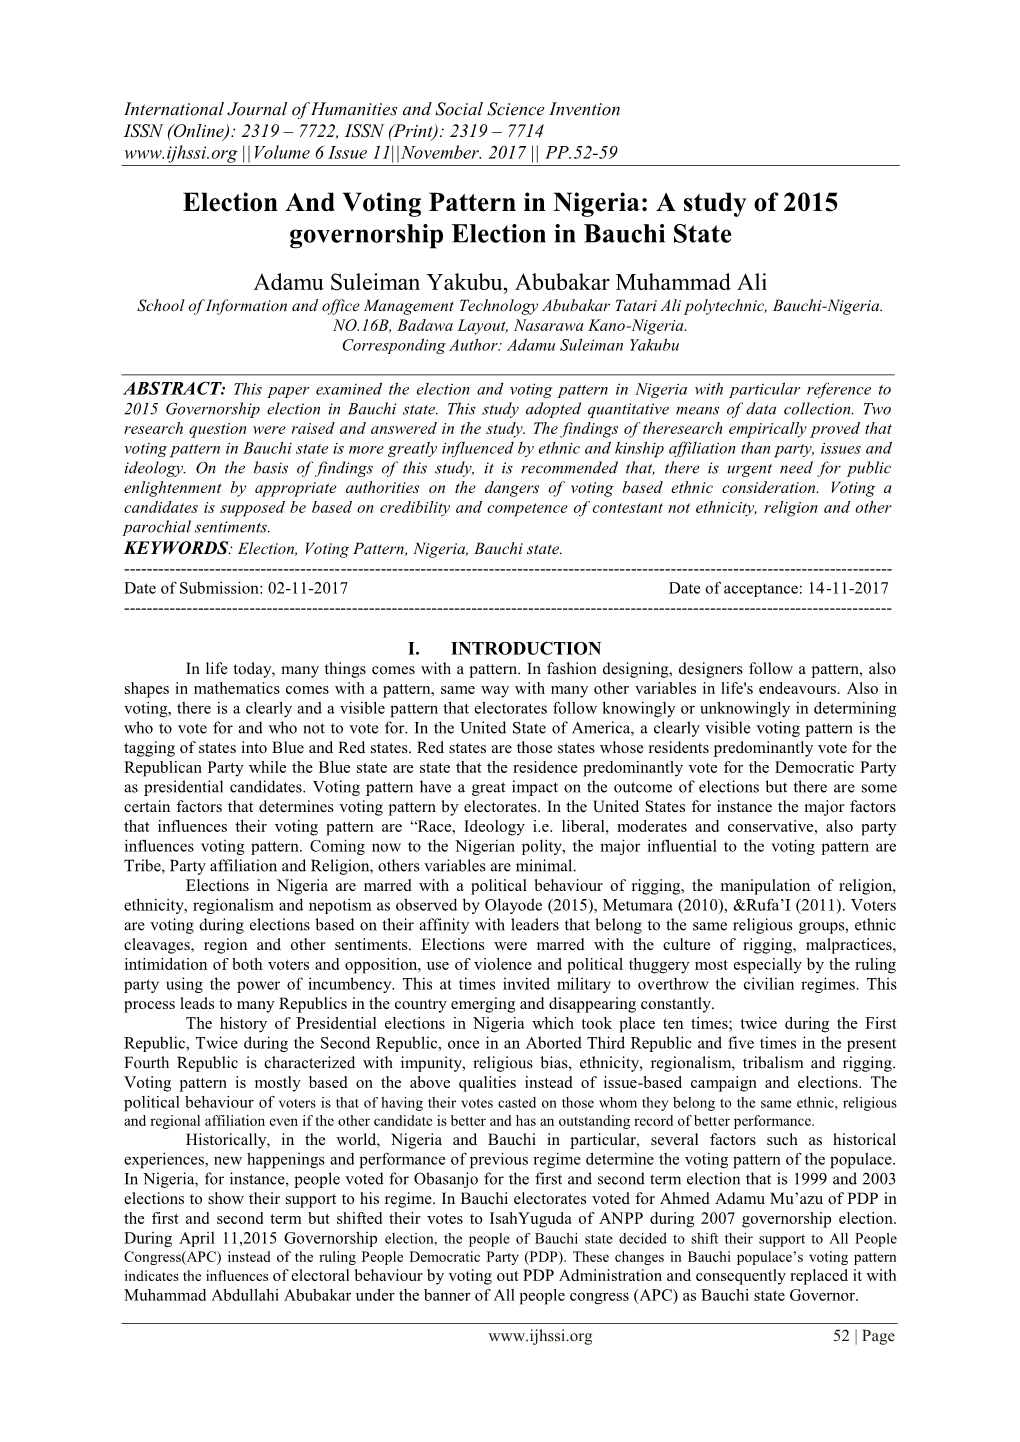 Election and Voting Pattern in Nigeria: a Study of 2015 Governorship Election in Bauchi State